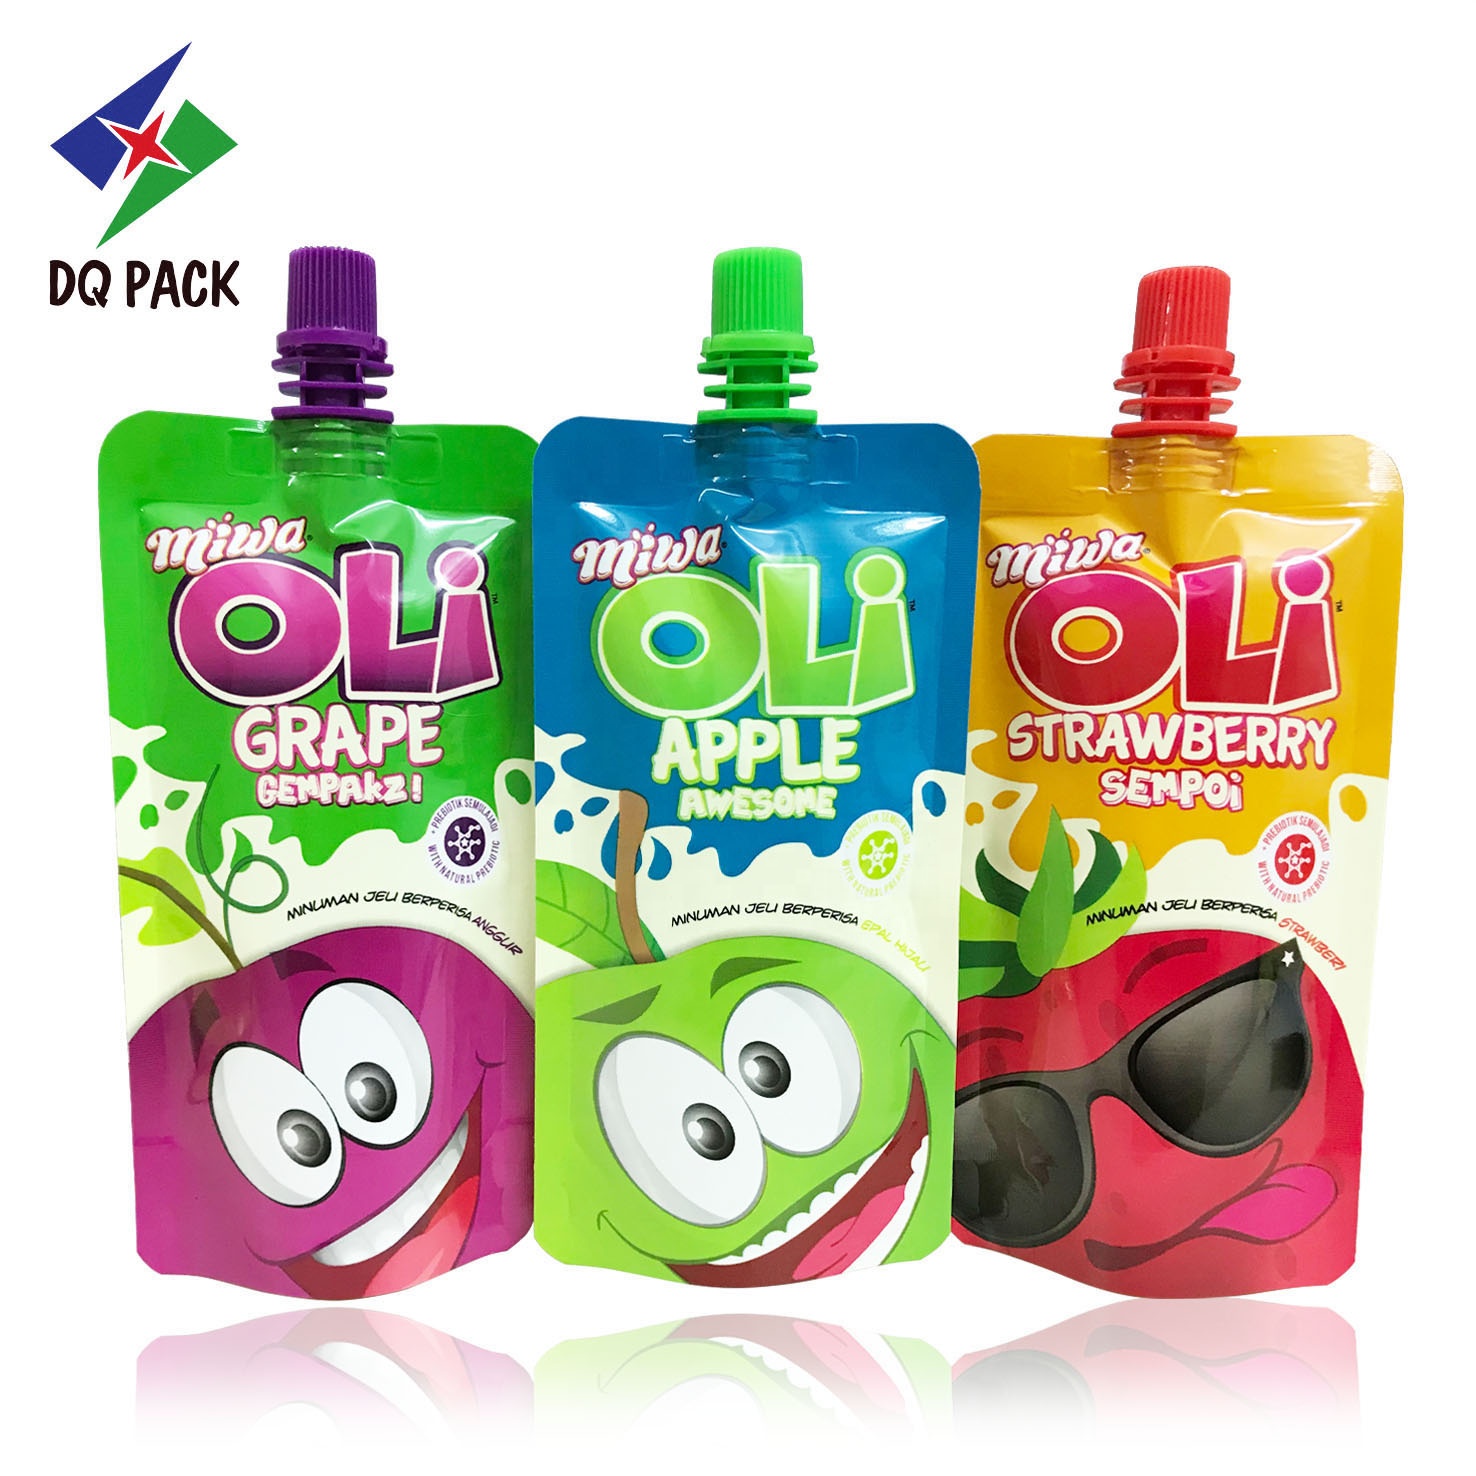 DQ PACK Bottle Shaped Beverage Doypack For Juice Baby Food Fruit Juice Packaging Pouch